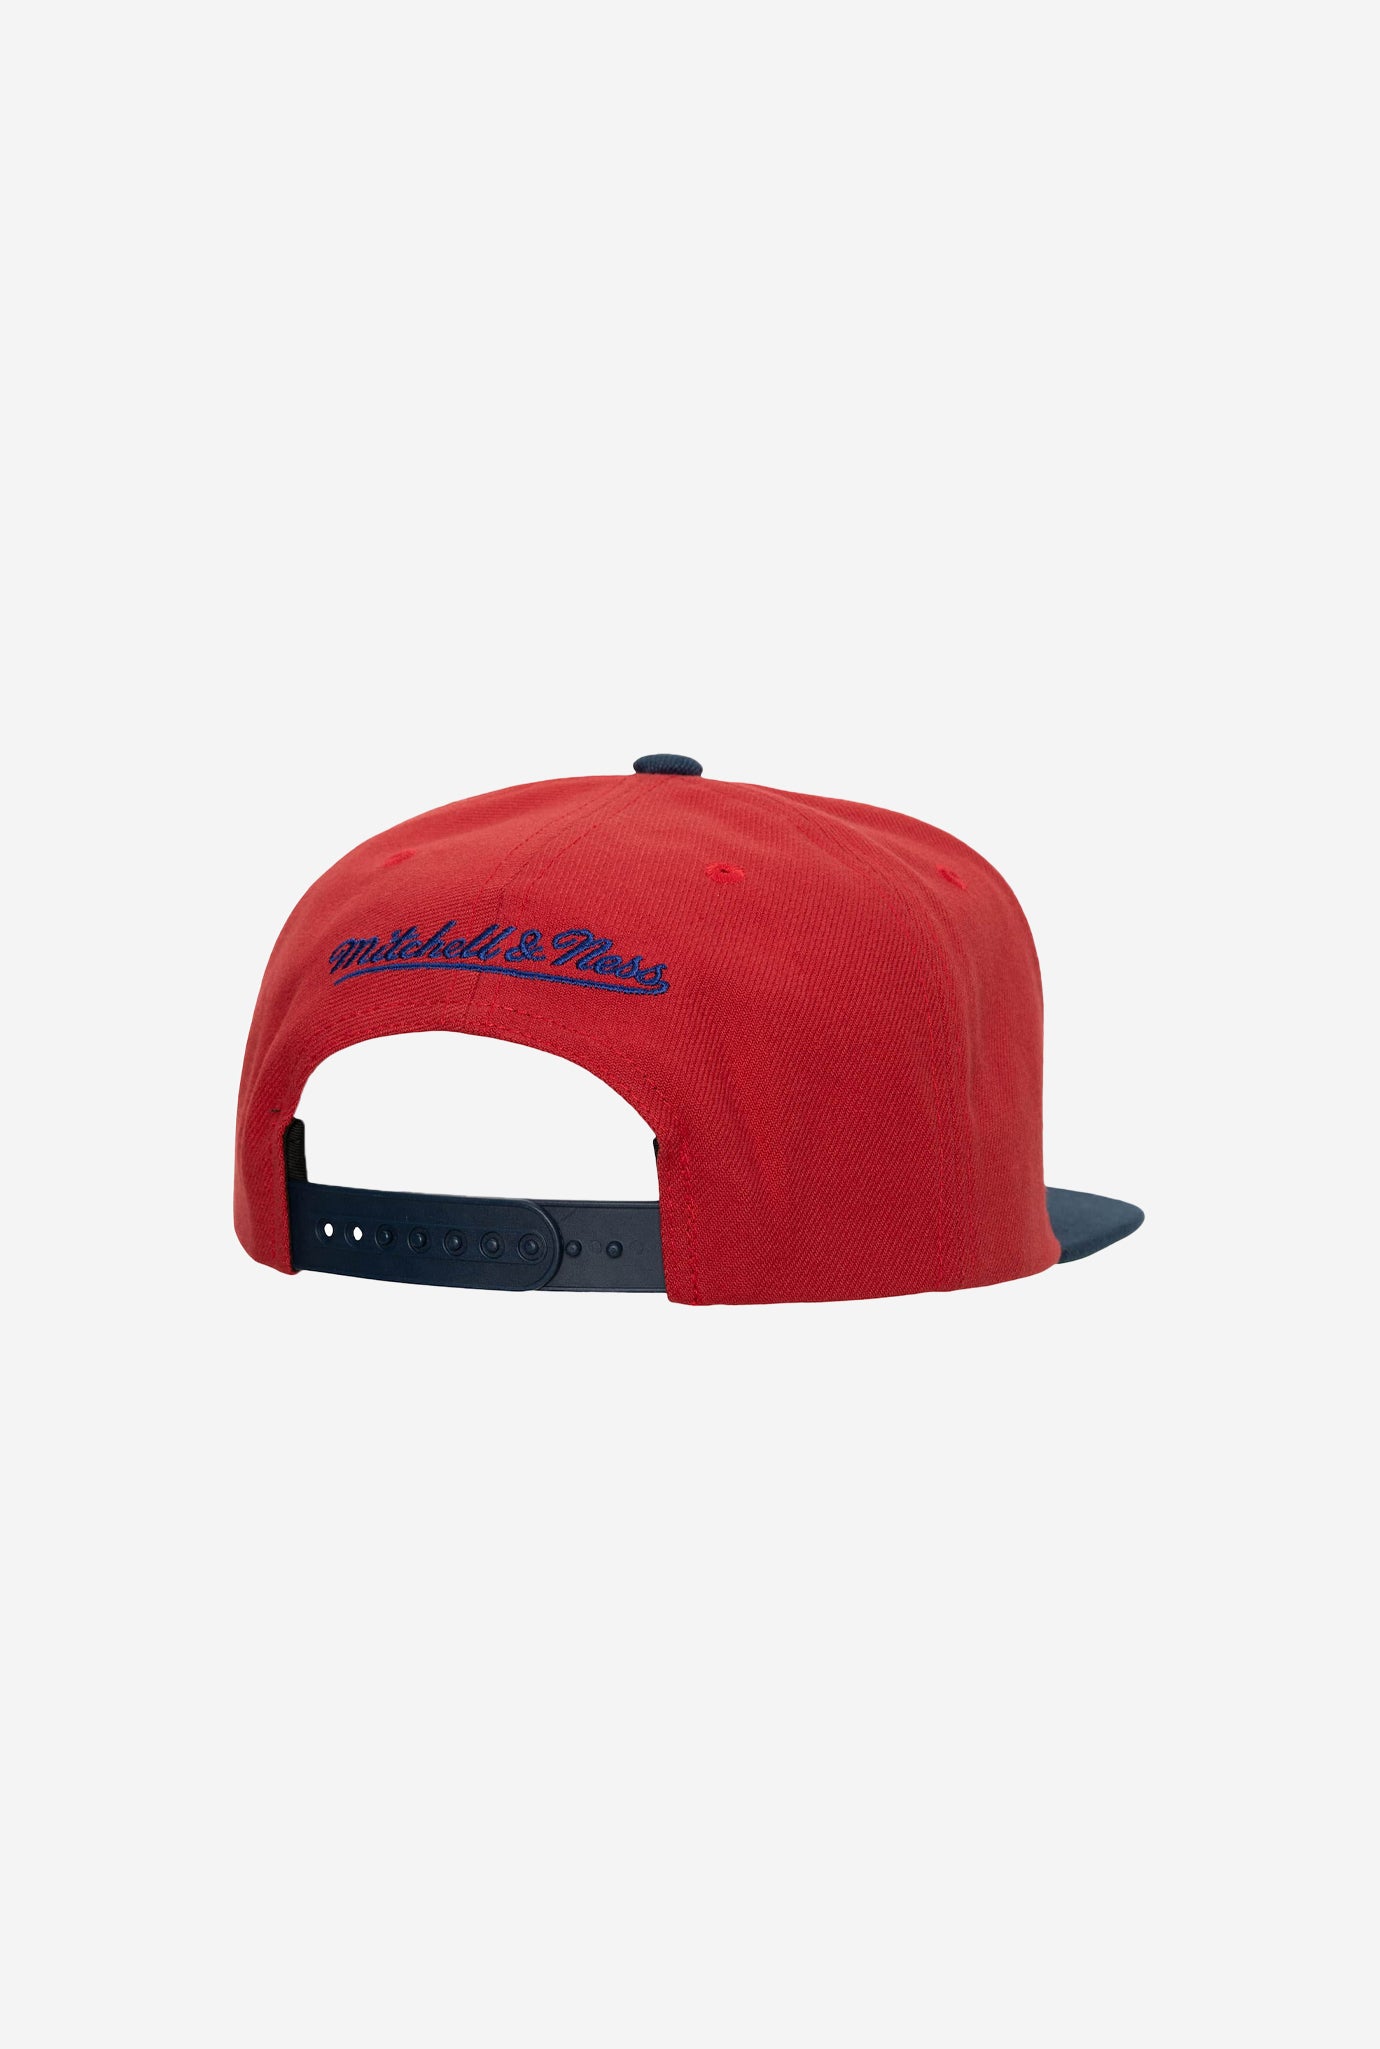 Montreal Canadiens Team 2 Tone 2.0 Snapback - Red/Royal